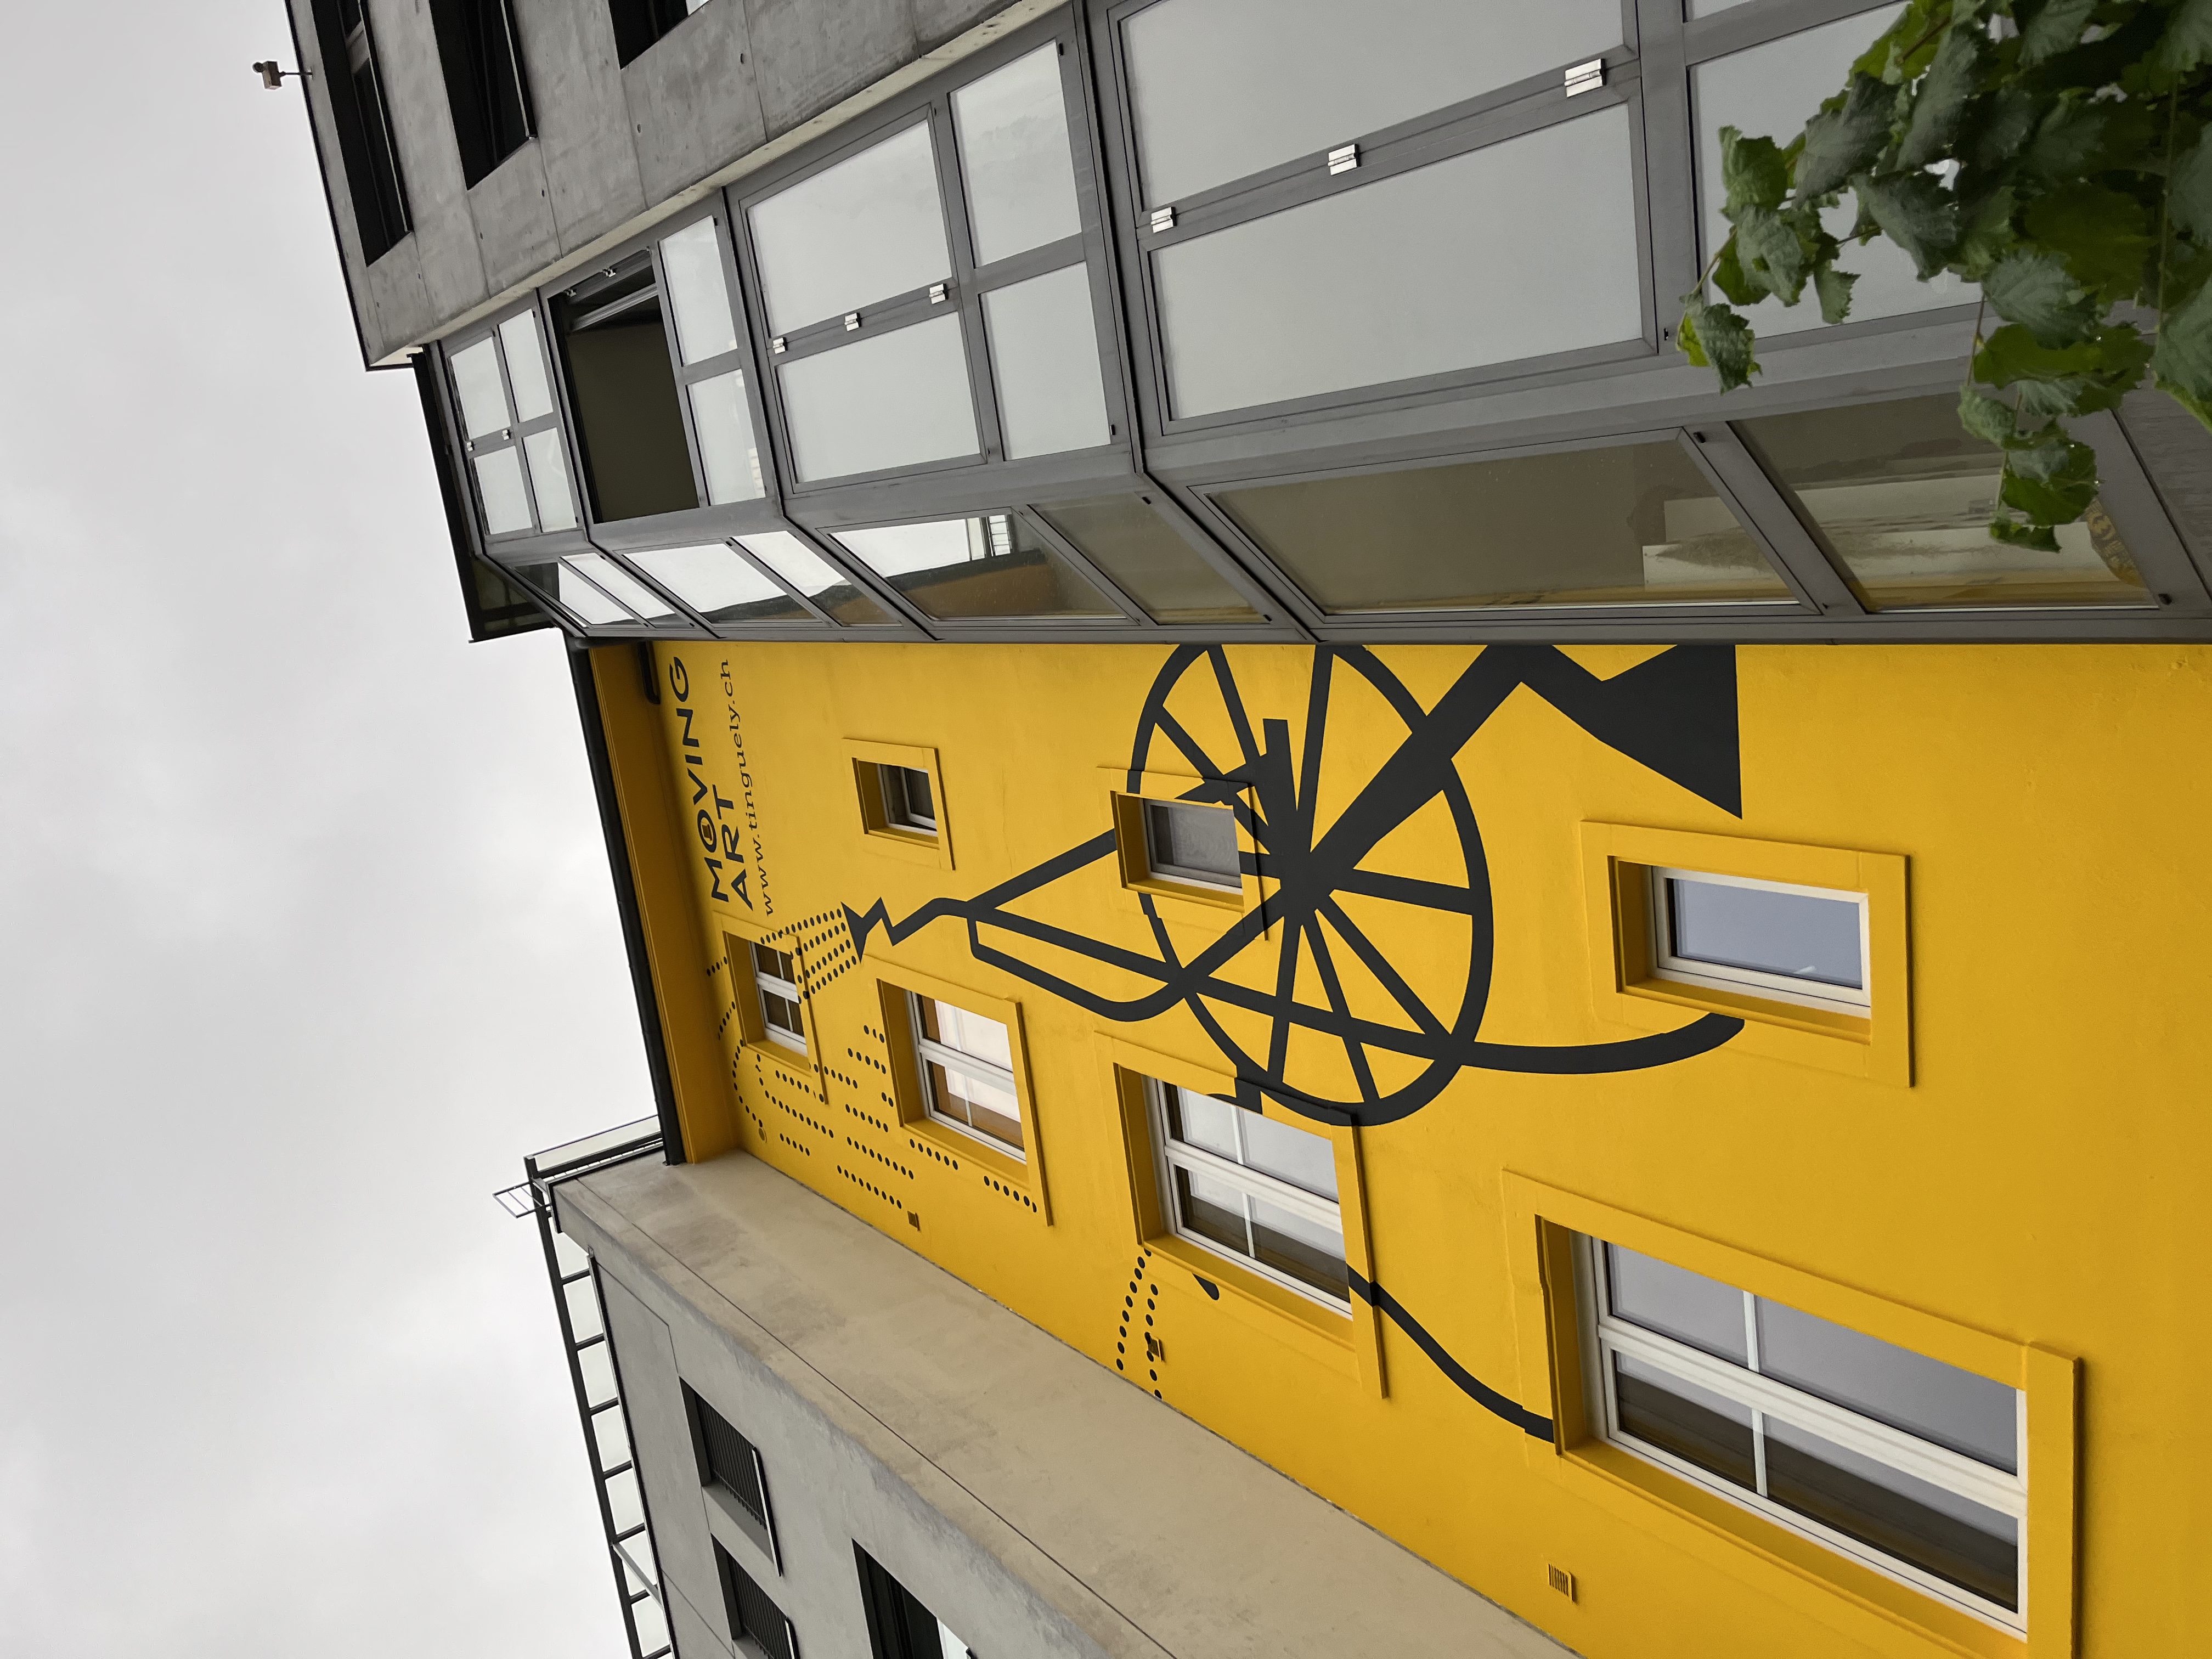 https://sarahweishaupt.ch/media/pages/home/illustration-fassade-fuer-museum-tinguely/2472b1dae6-1656364119/3627dabe-d8cf-46c8-b0ba-add298770446.jpeg